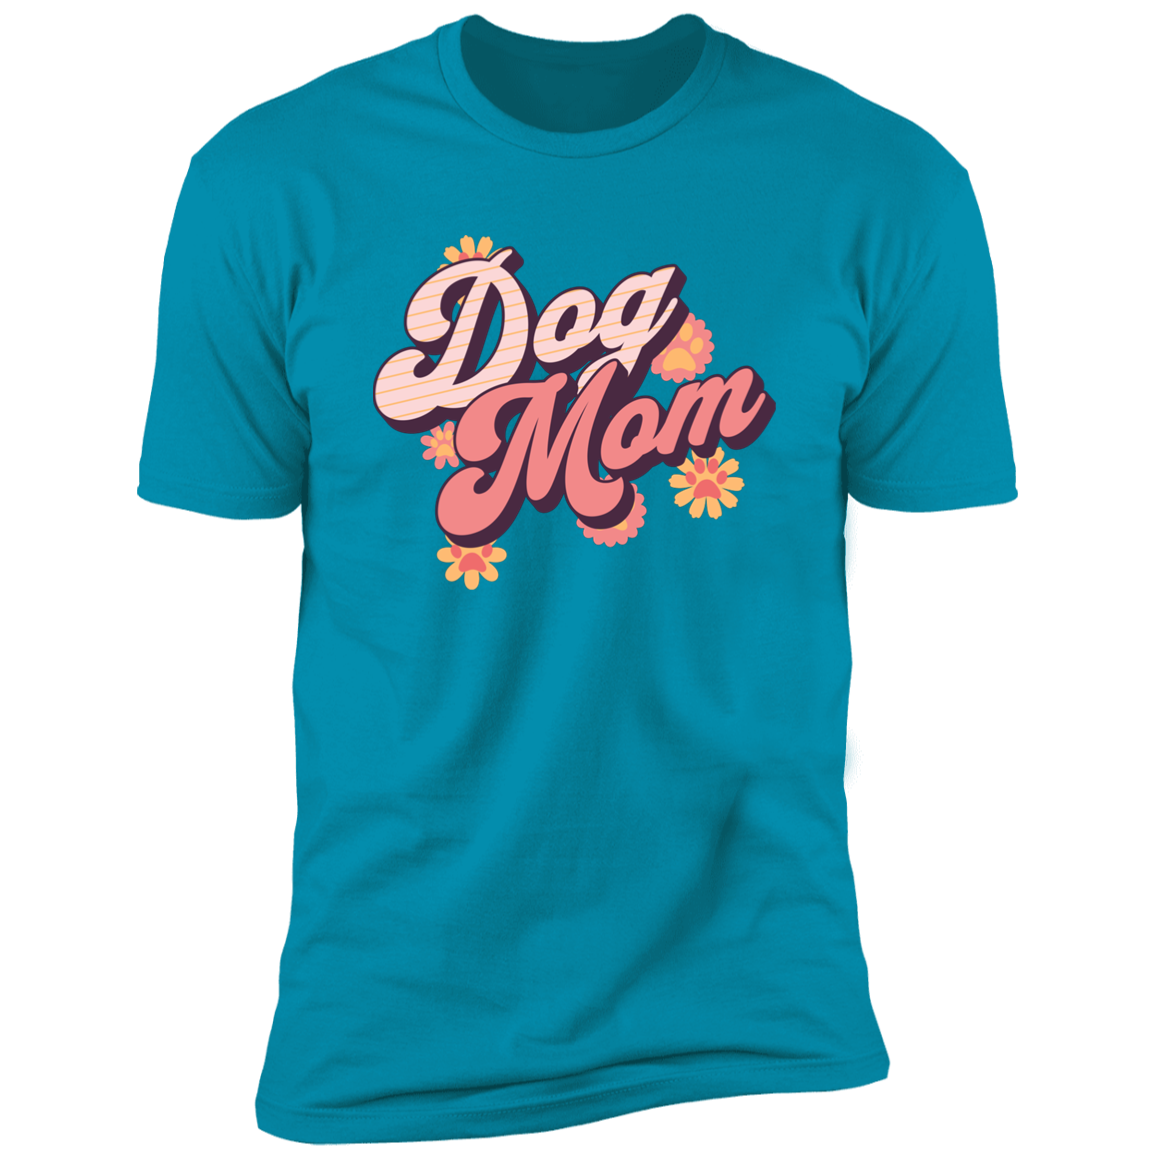 Retro Dog Mom t-shirt, Dog Mom shirt, Dog T-shirt for humans, in turquoise